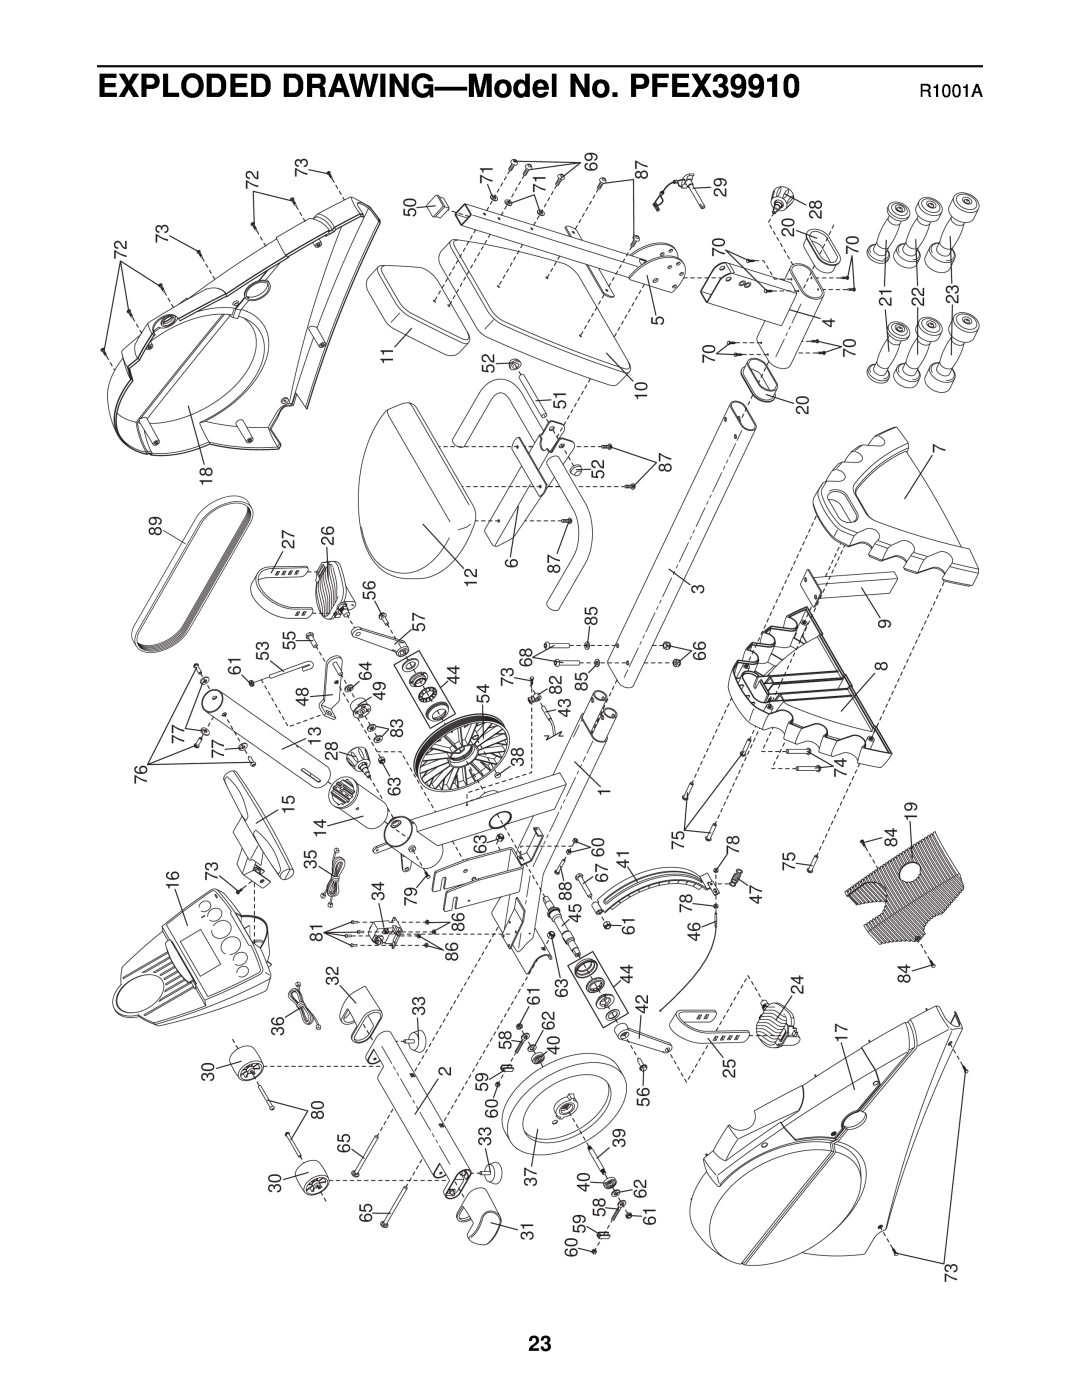 ProForm PFEX39910 user manual DRAWING-Model, Exploded 